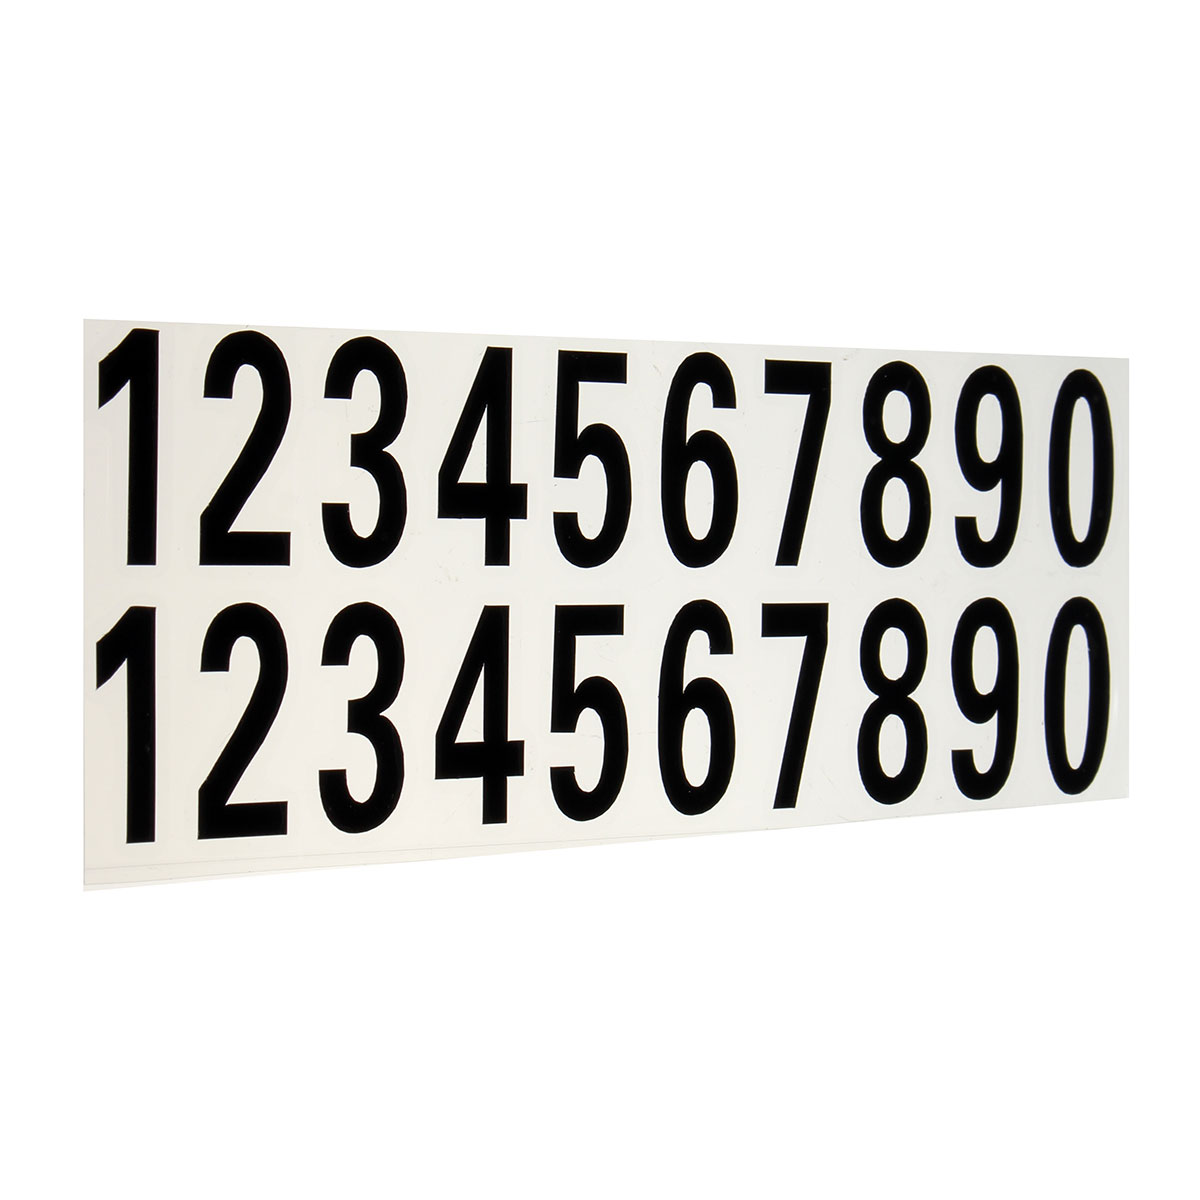 Lot of 20 White,Black Vinyl Street Address,Mailbox Number Decal Stickers KING